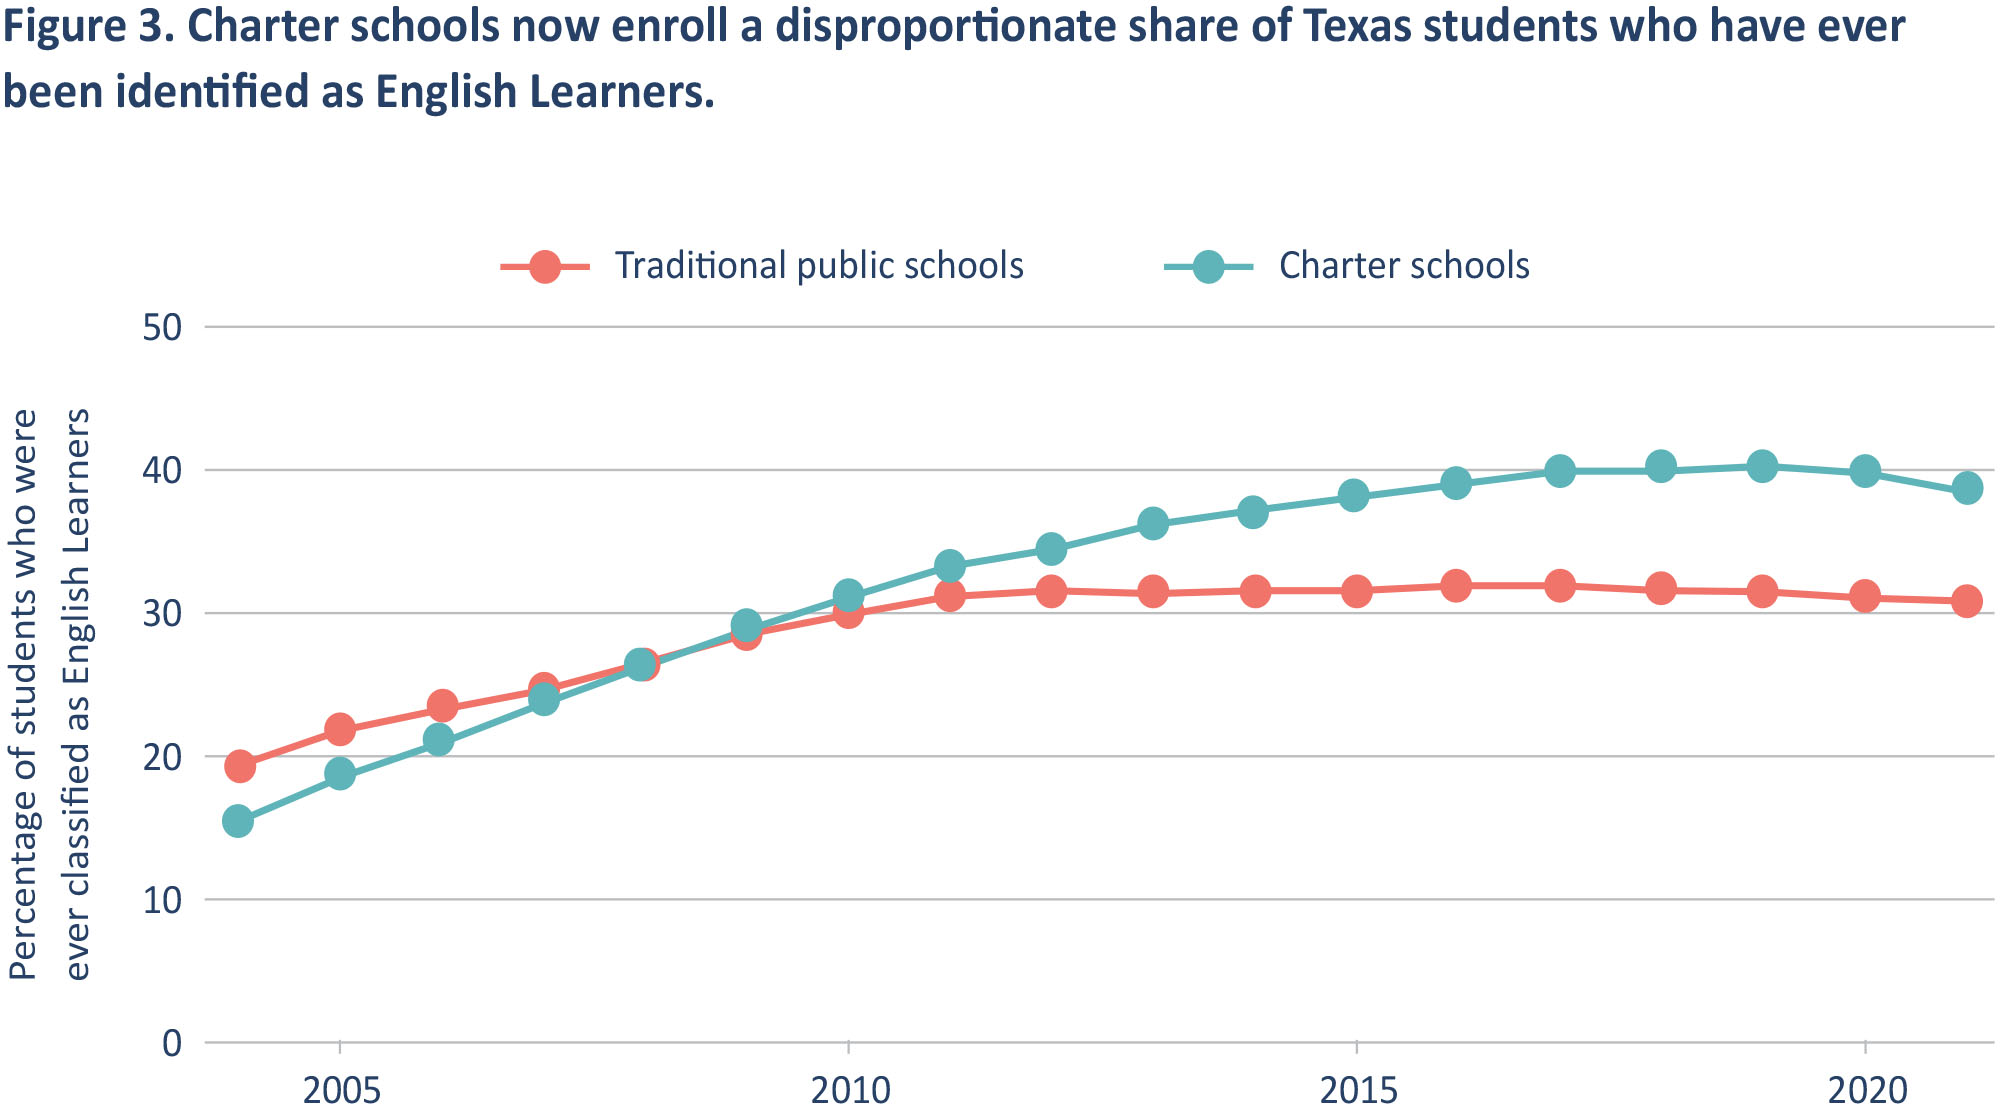 Figure 3. Charter schools now enroll a disproportionate share of Texas students who have ever been identified as English Learners.